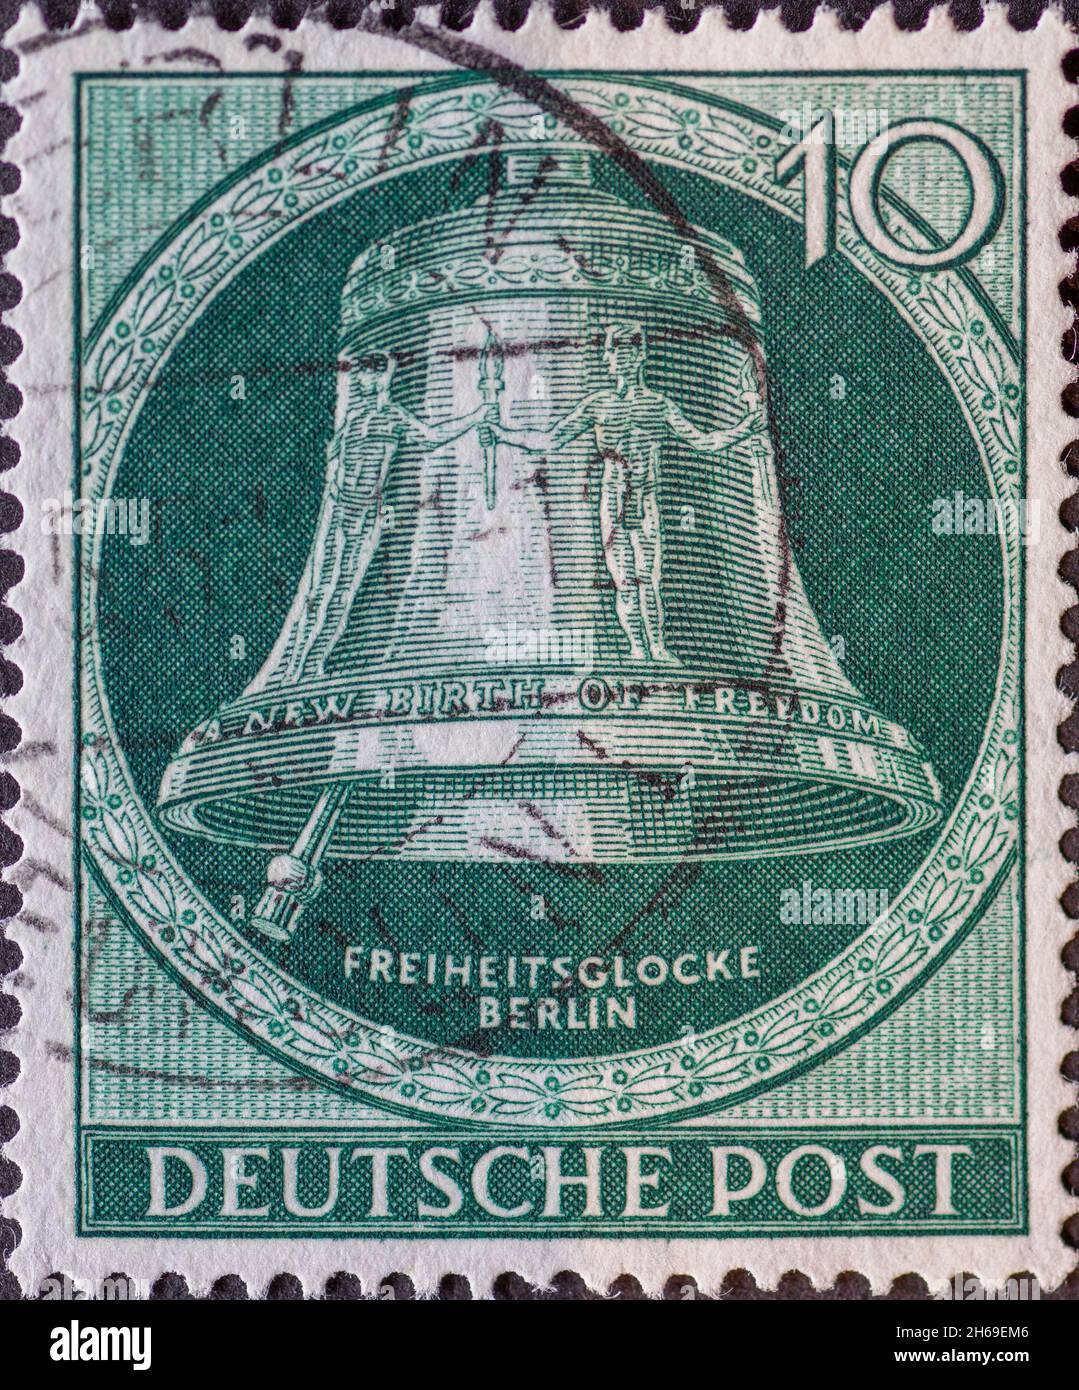 GERMANY, Berlin - CIRCA 1951: a postage stamp from Germany, Berlin showing the liberty bell with the text: New Birth of freedom. Clapper left. Color: Stock Photo